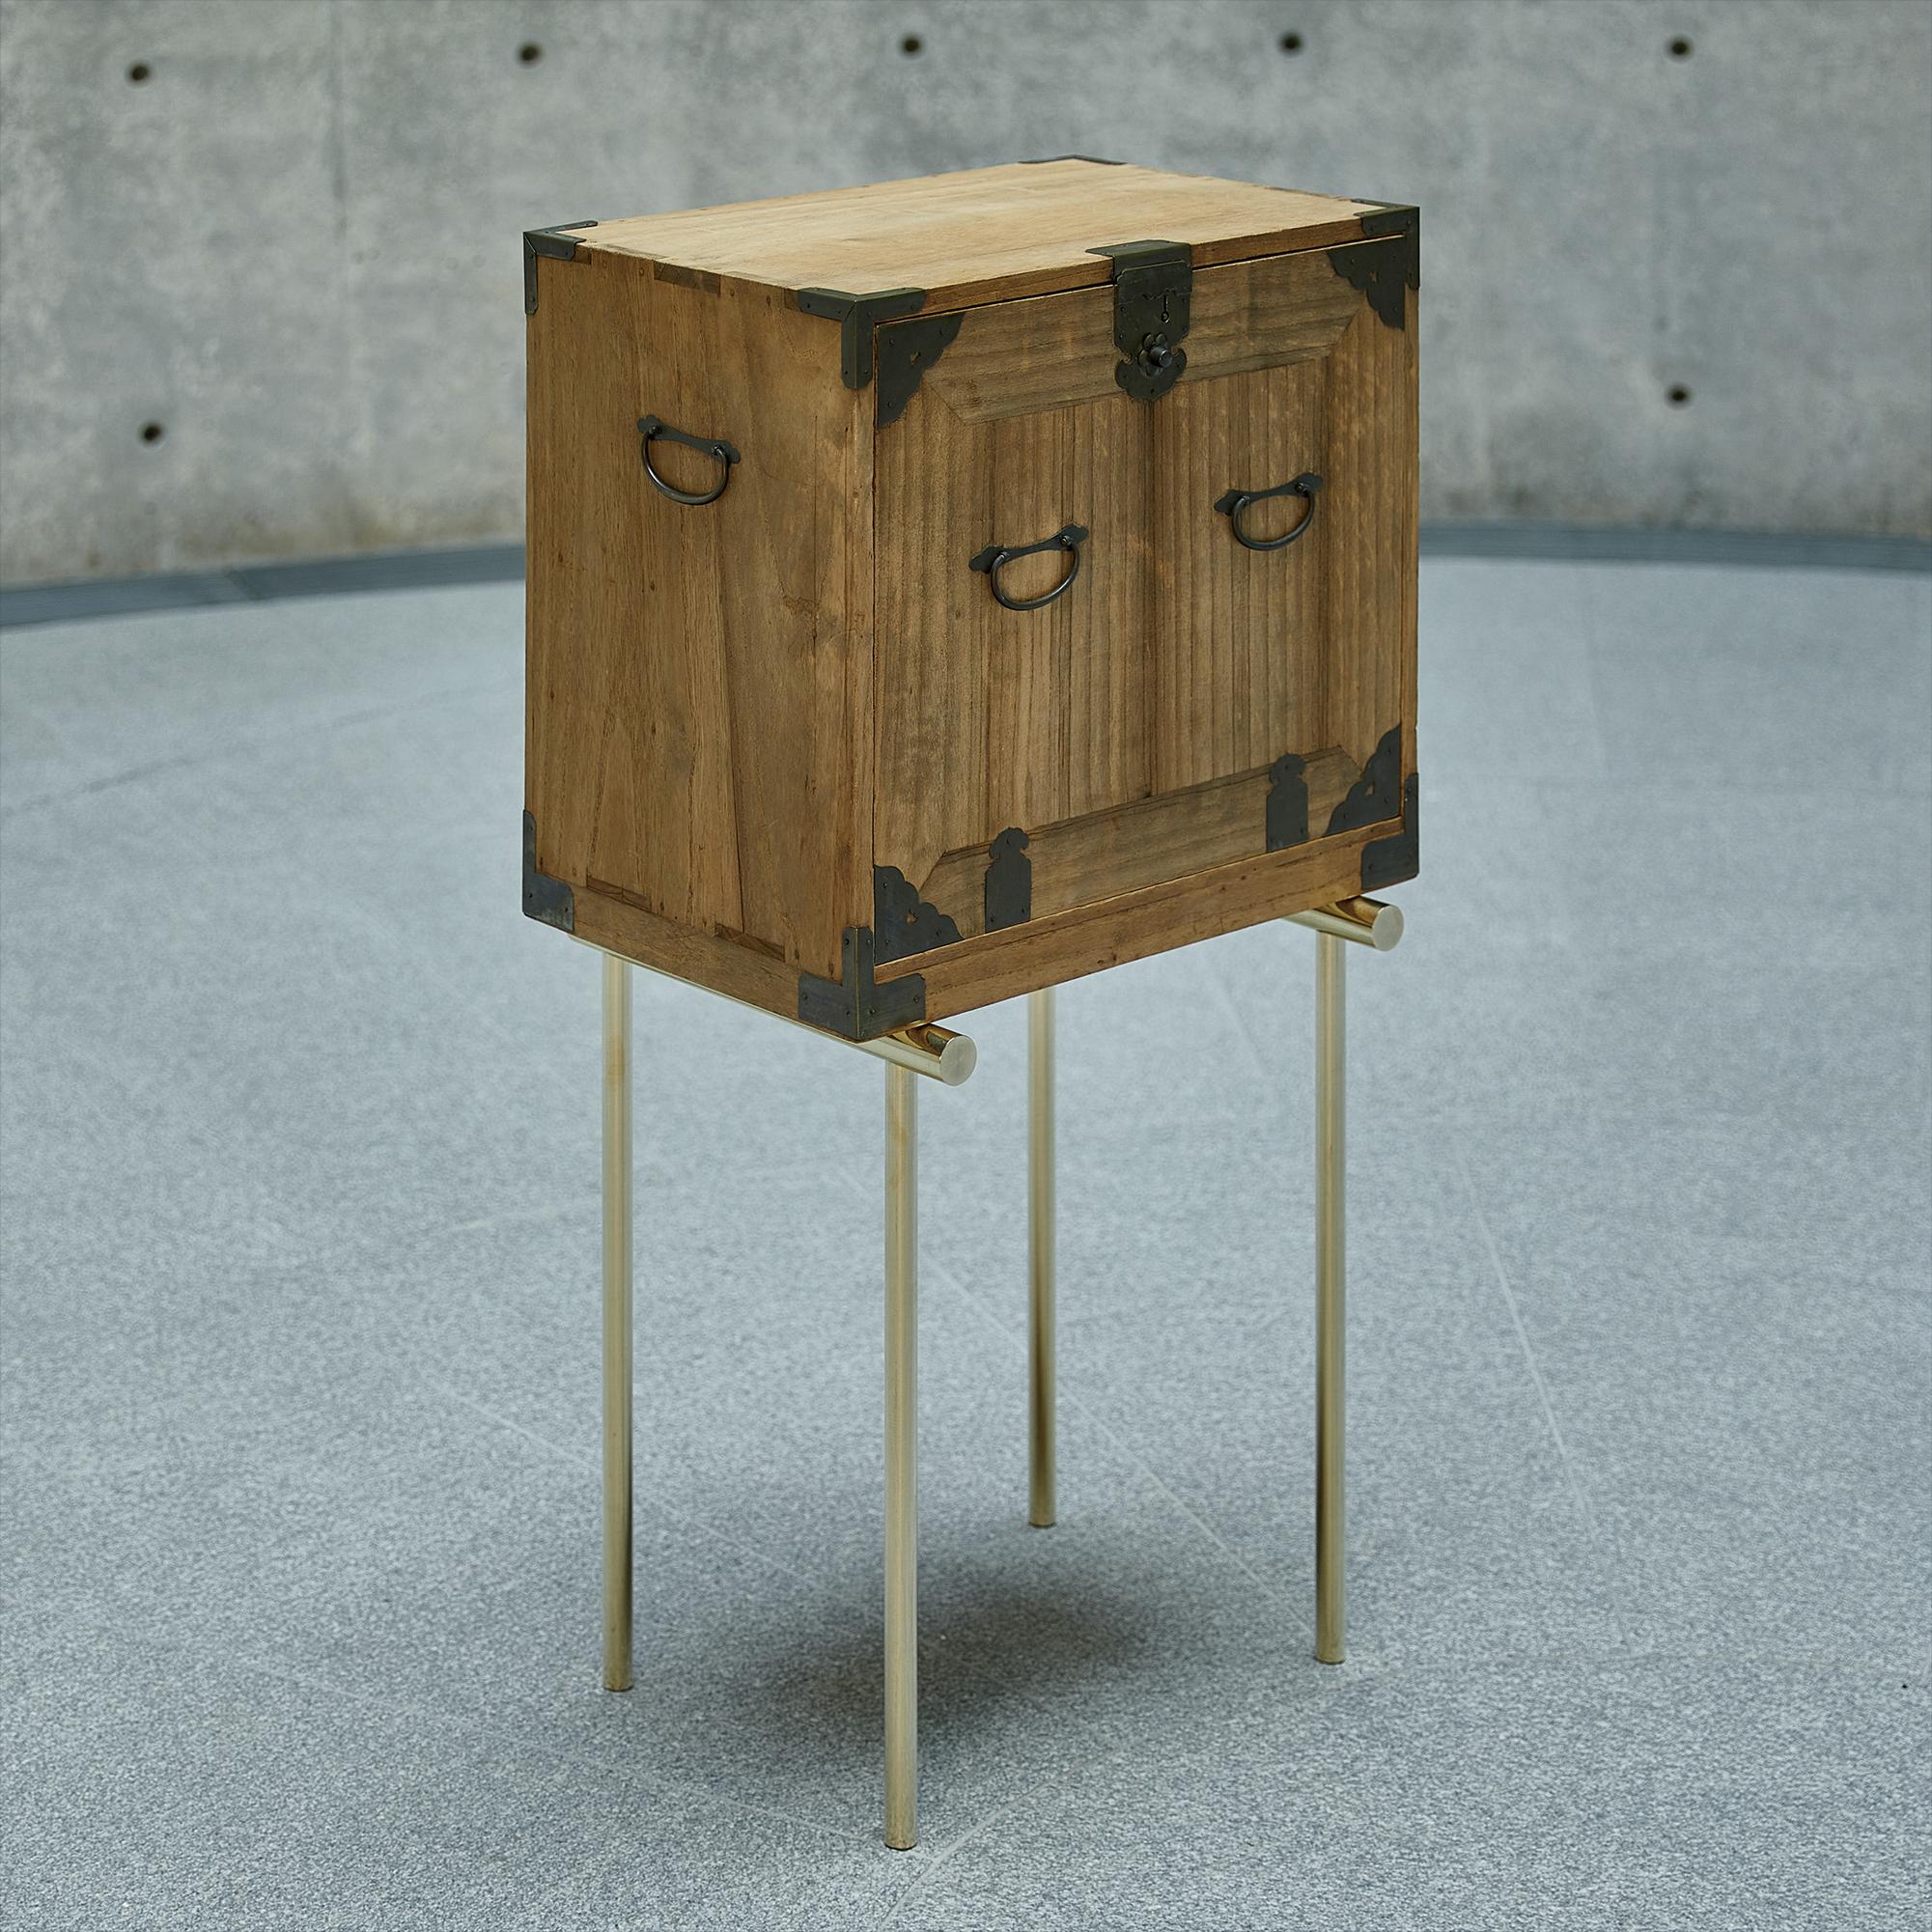 Cabinet by Ryosuke Harashima.
Name: Casa Do Walk
Collection: STILLIFE

A chest for ship with a key door.
With four legs that imitate a stilt building structure, it looks like a house that going to walk.

STILLIFE
STILLIFE is not to redesign